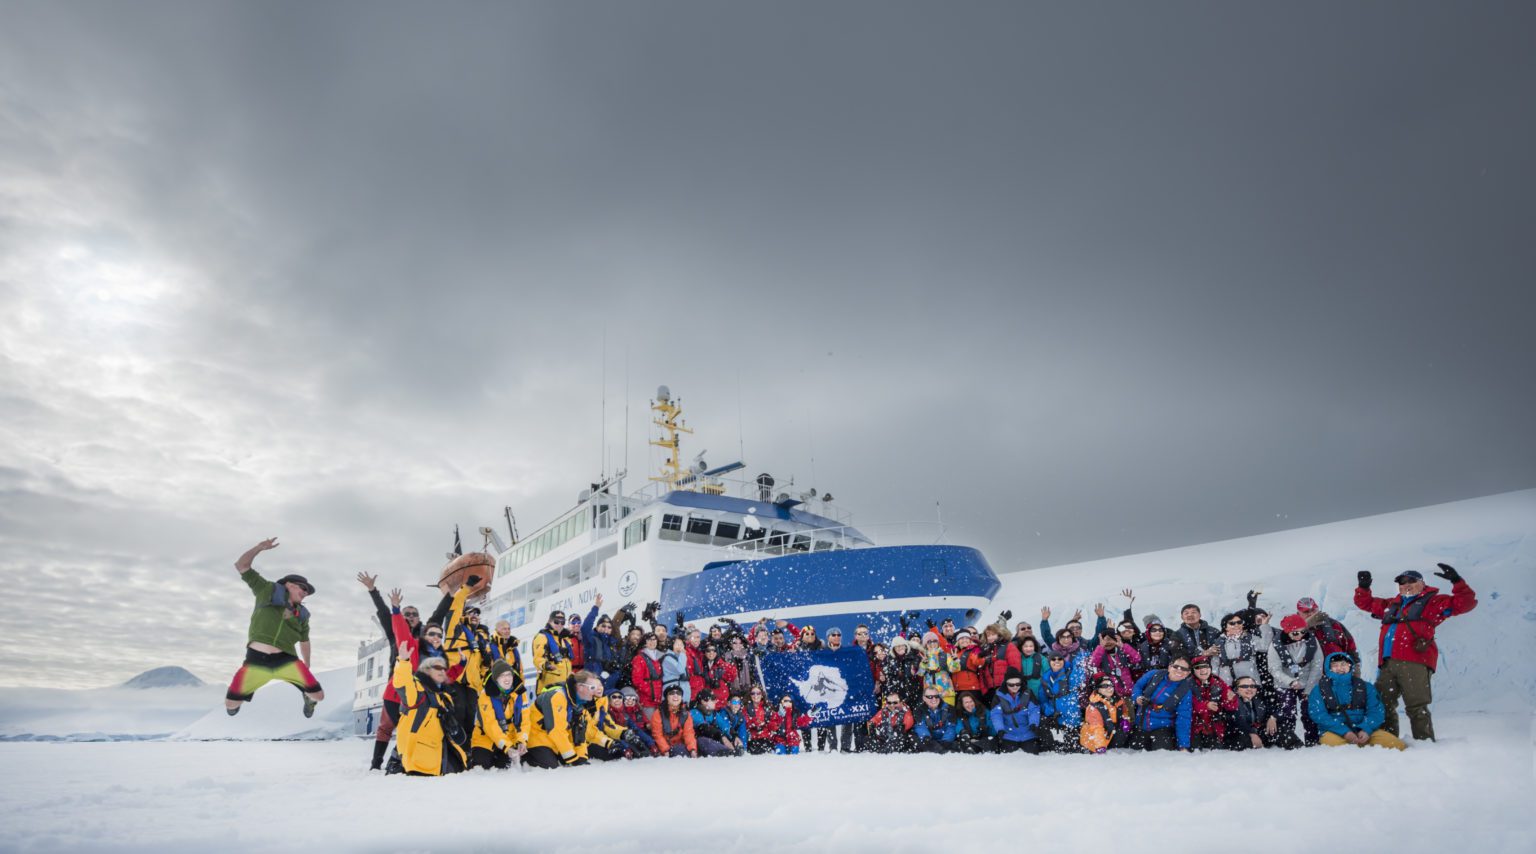 passengers and crew pose in front of their blue and white ice vessel celebrating their arrival to Antarctica